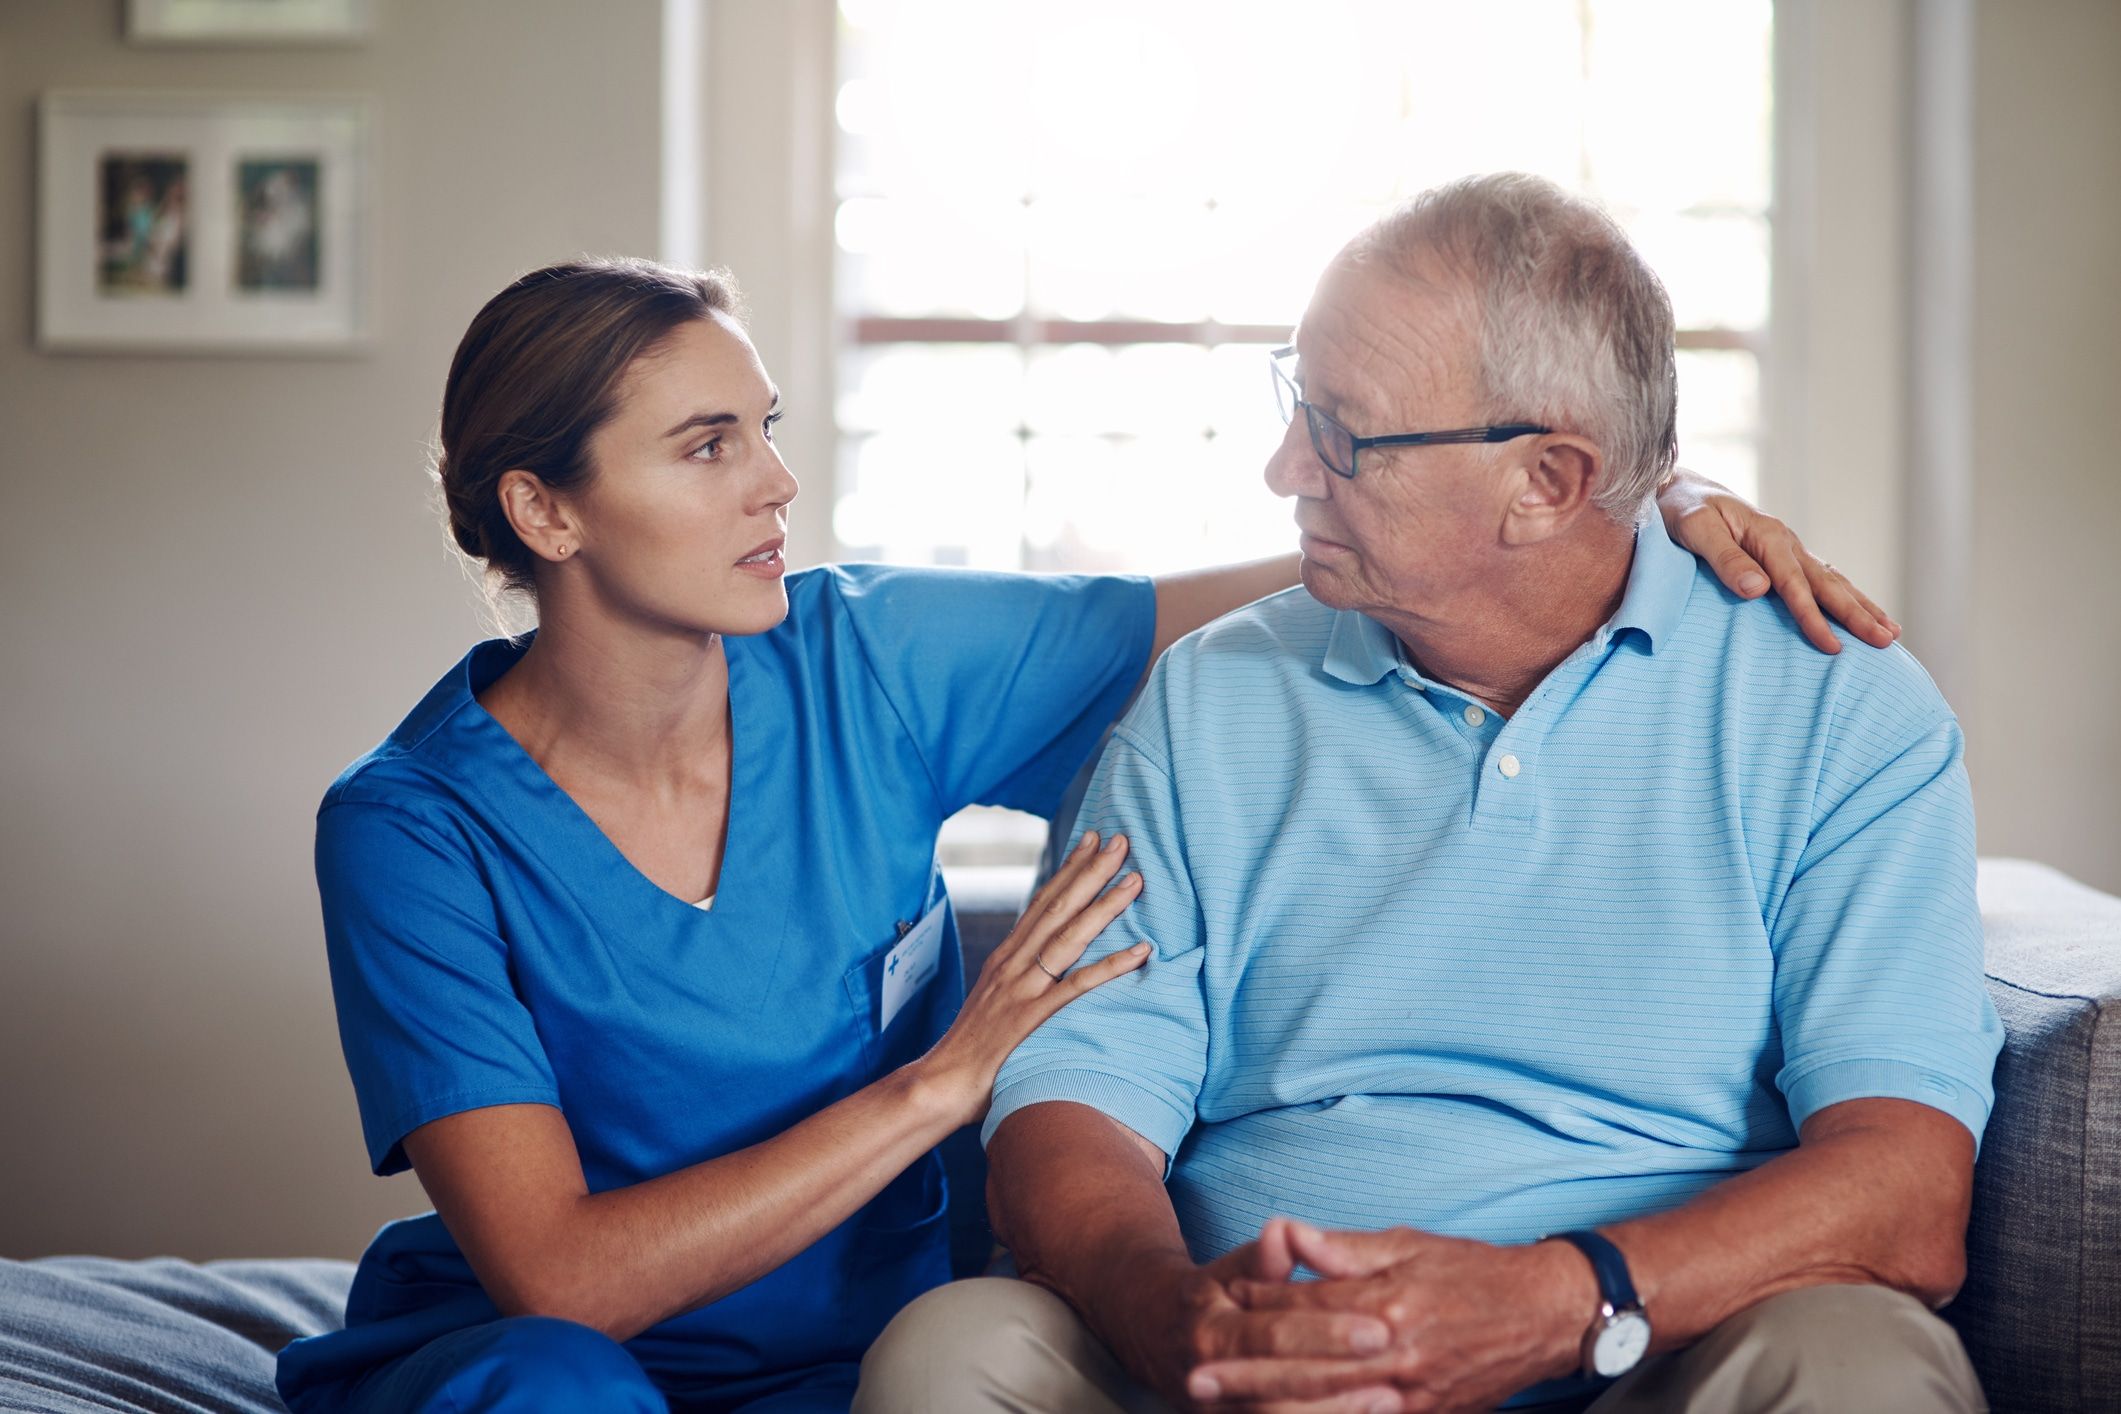 Checklist: Questions to ask when choosing a nursing home